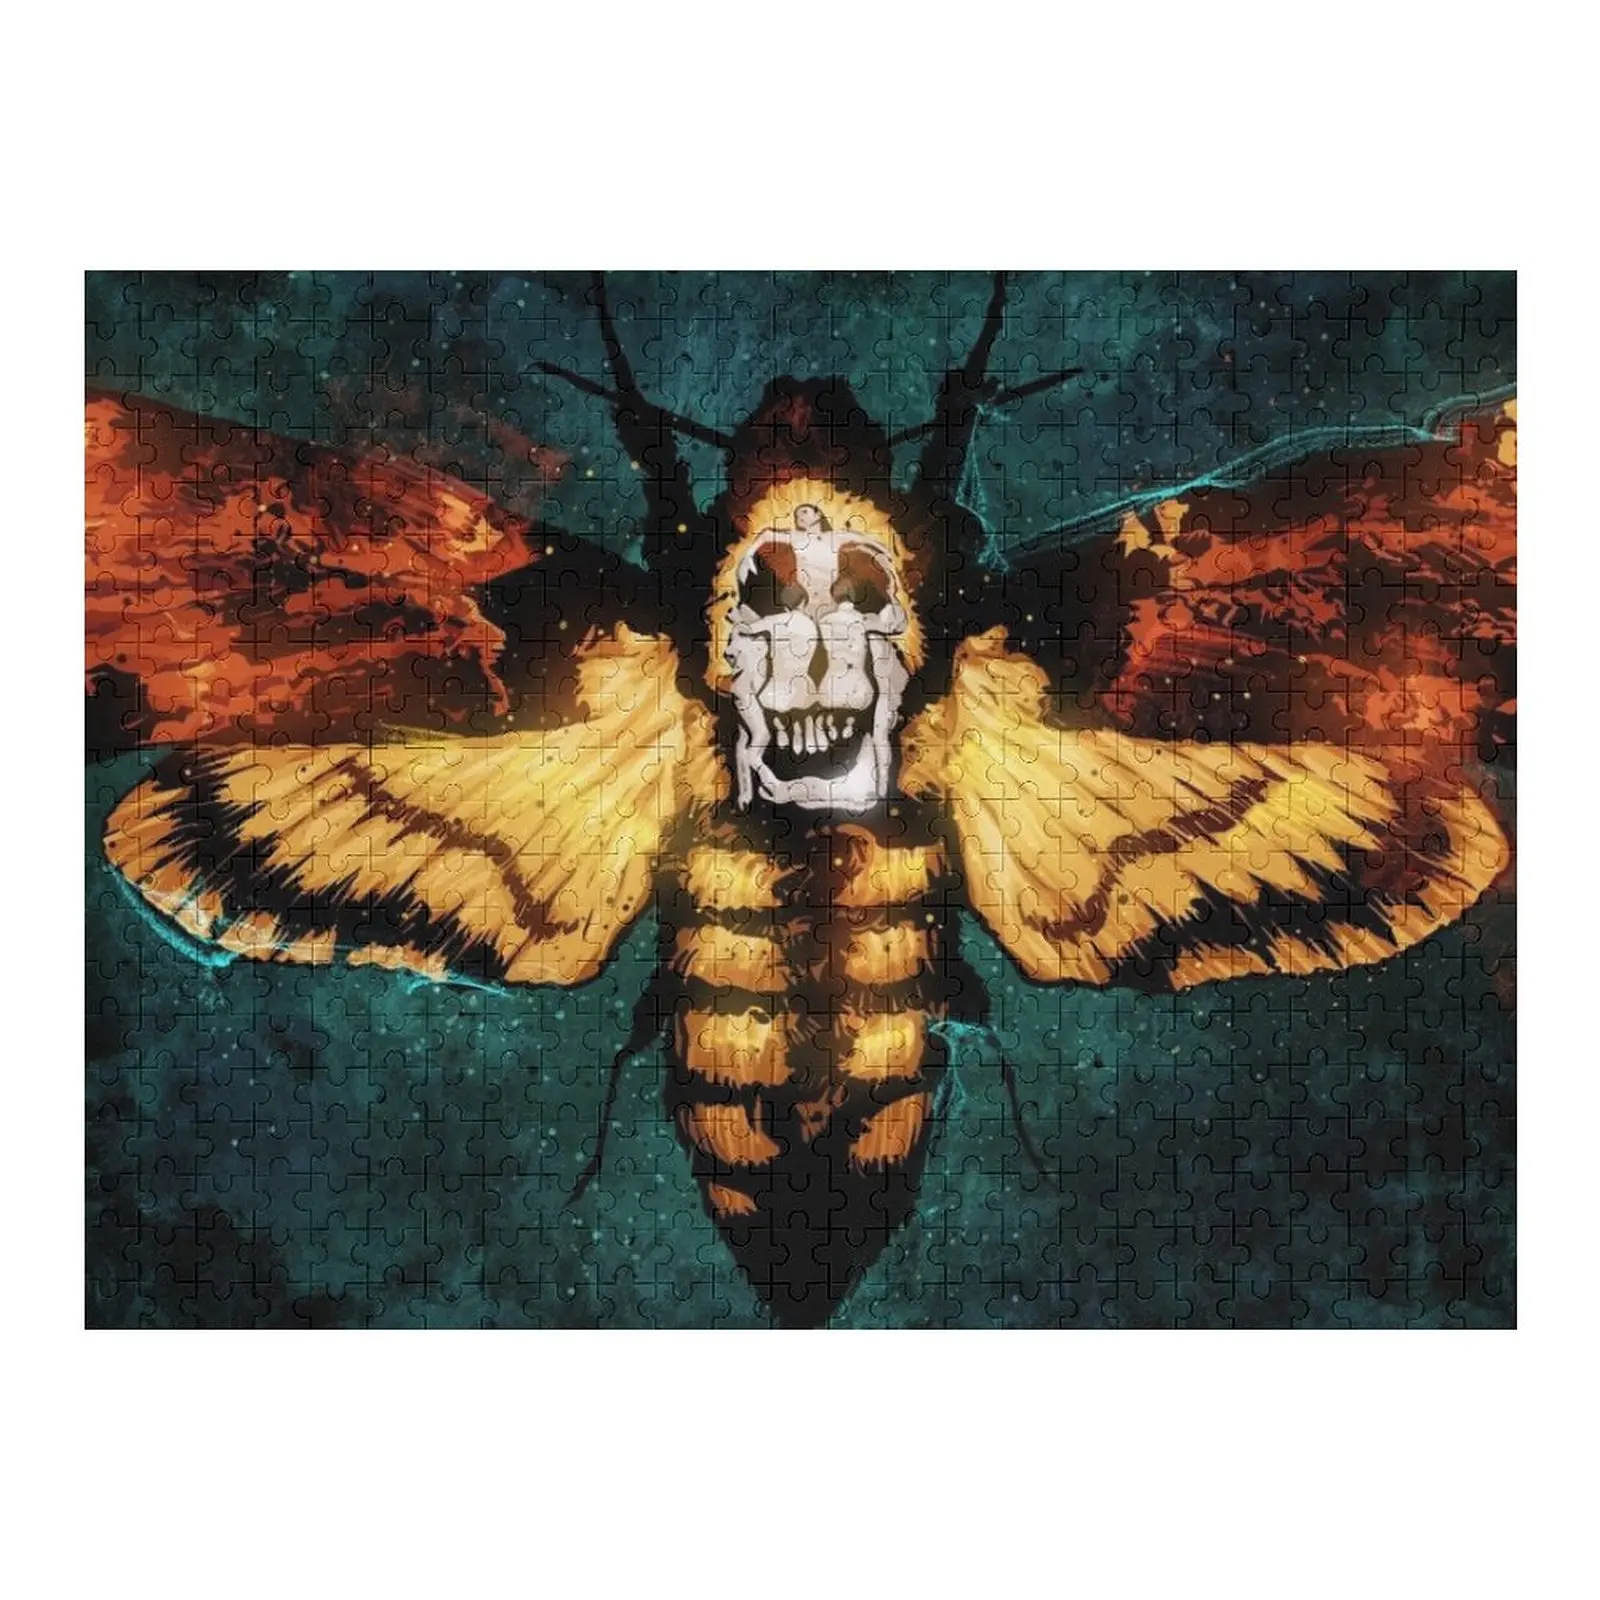 The Silence of the Lambs Jigsaw Puzzle Wooden Puzzle Adults Baby Toy new wooden double jigsaw puzzle board baby children puzzle early education toy animal traffic wooden jigsaw puzzle toy